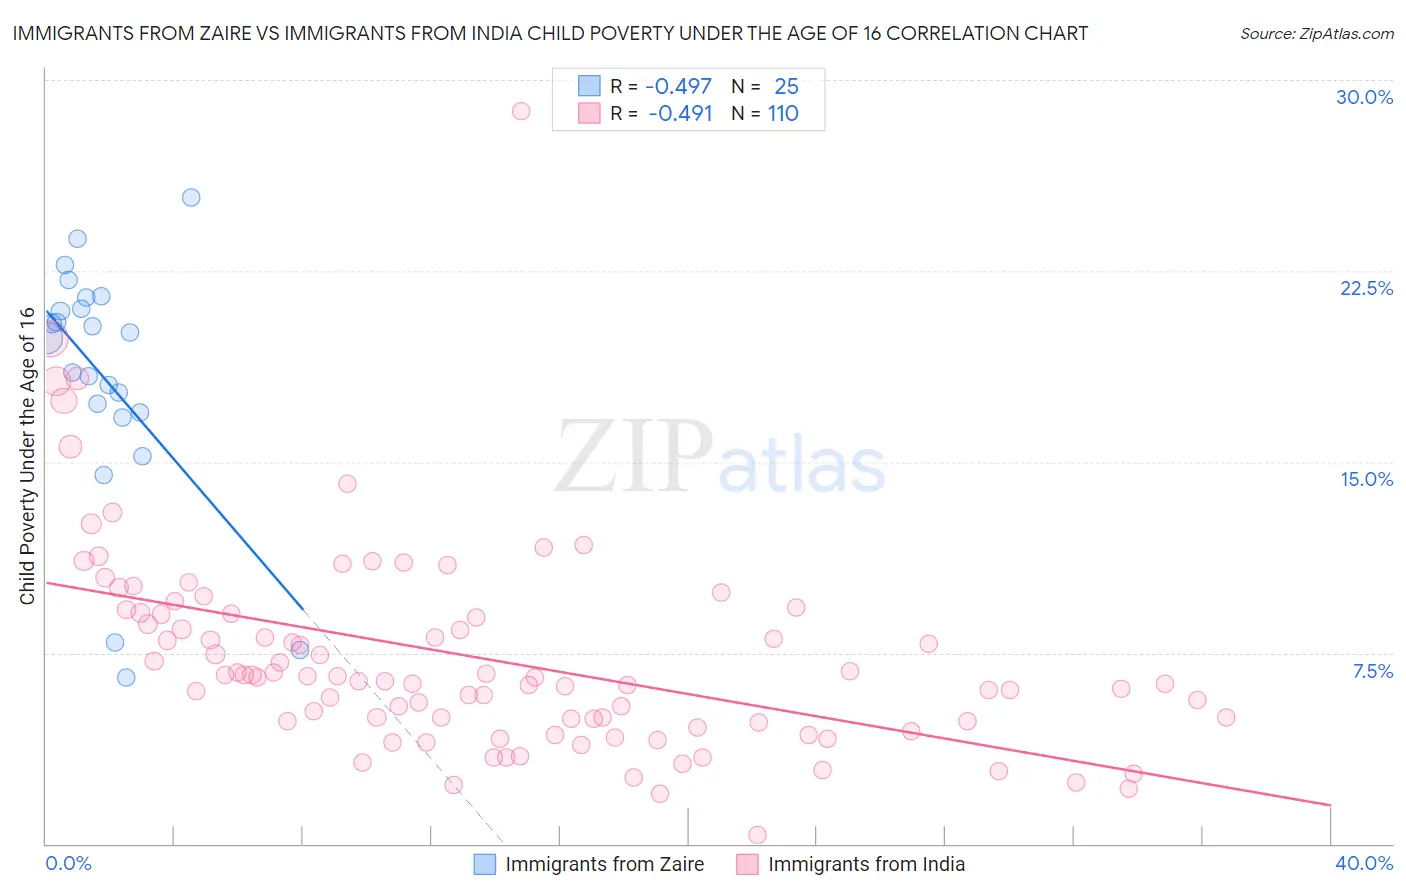 Immigrants from Zaire vs Immigrants from India Child Poverty Under the Age of 16